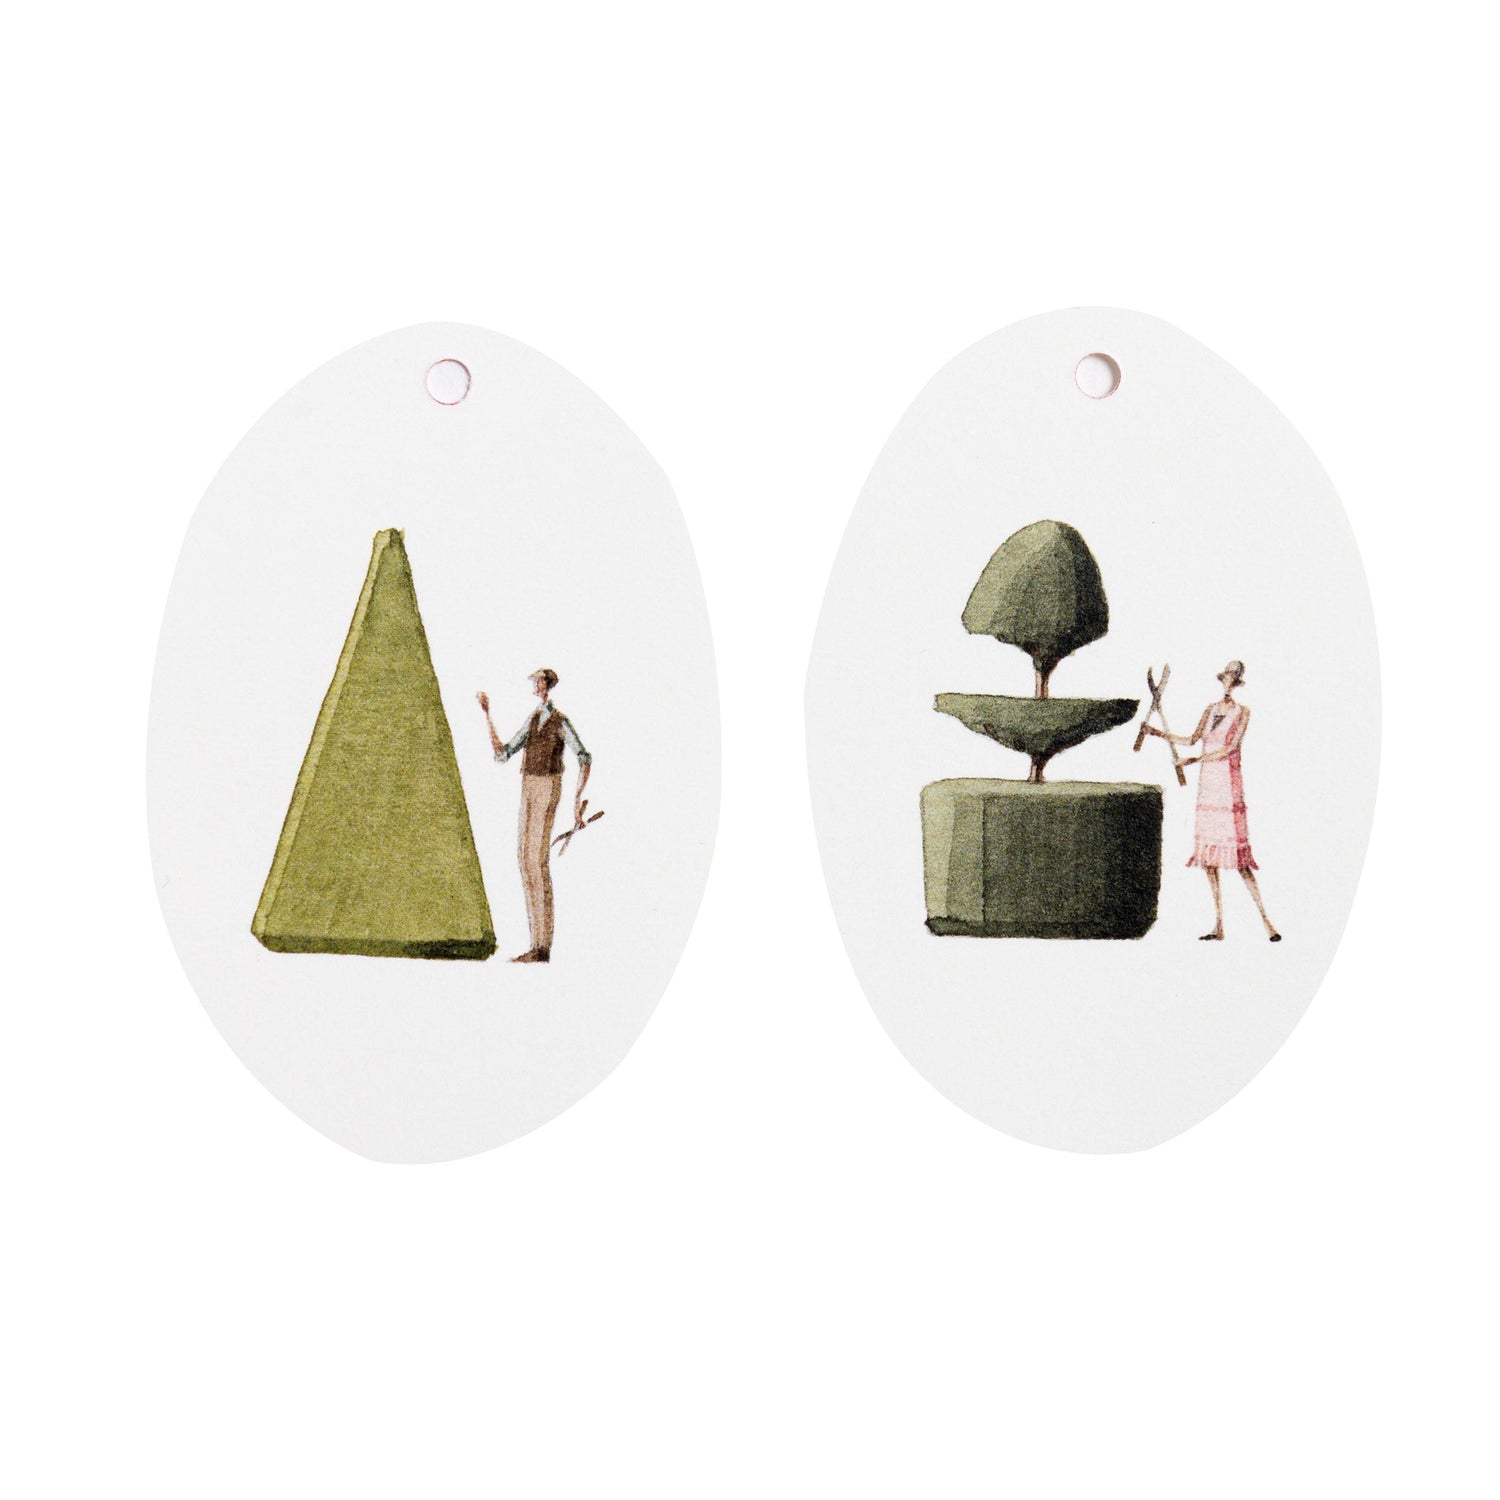 gift tags, tags, topiary, made in england, fsc paper, illustration